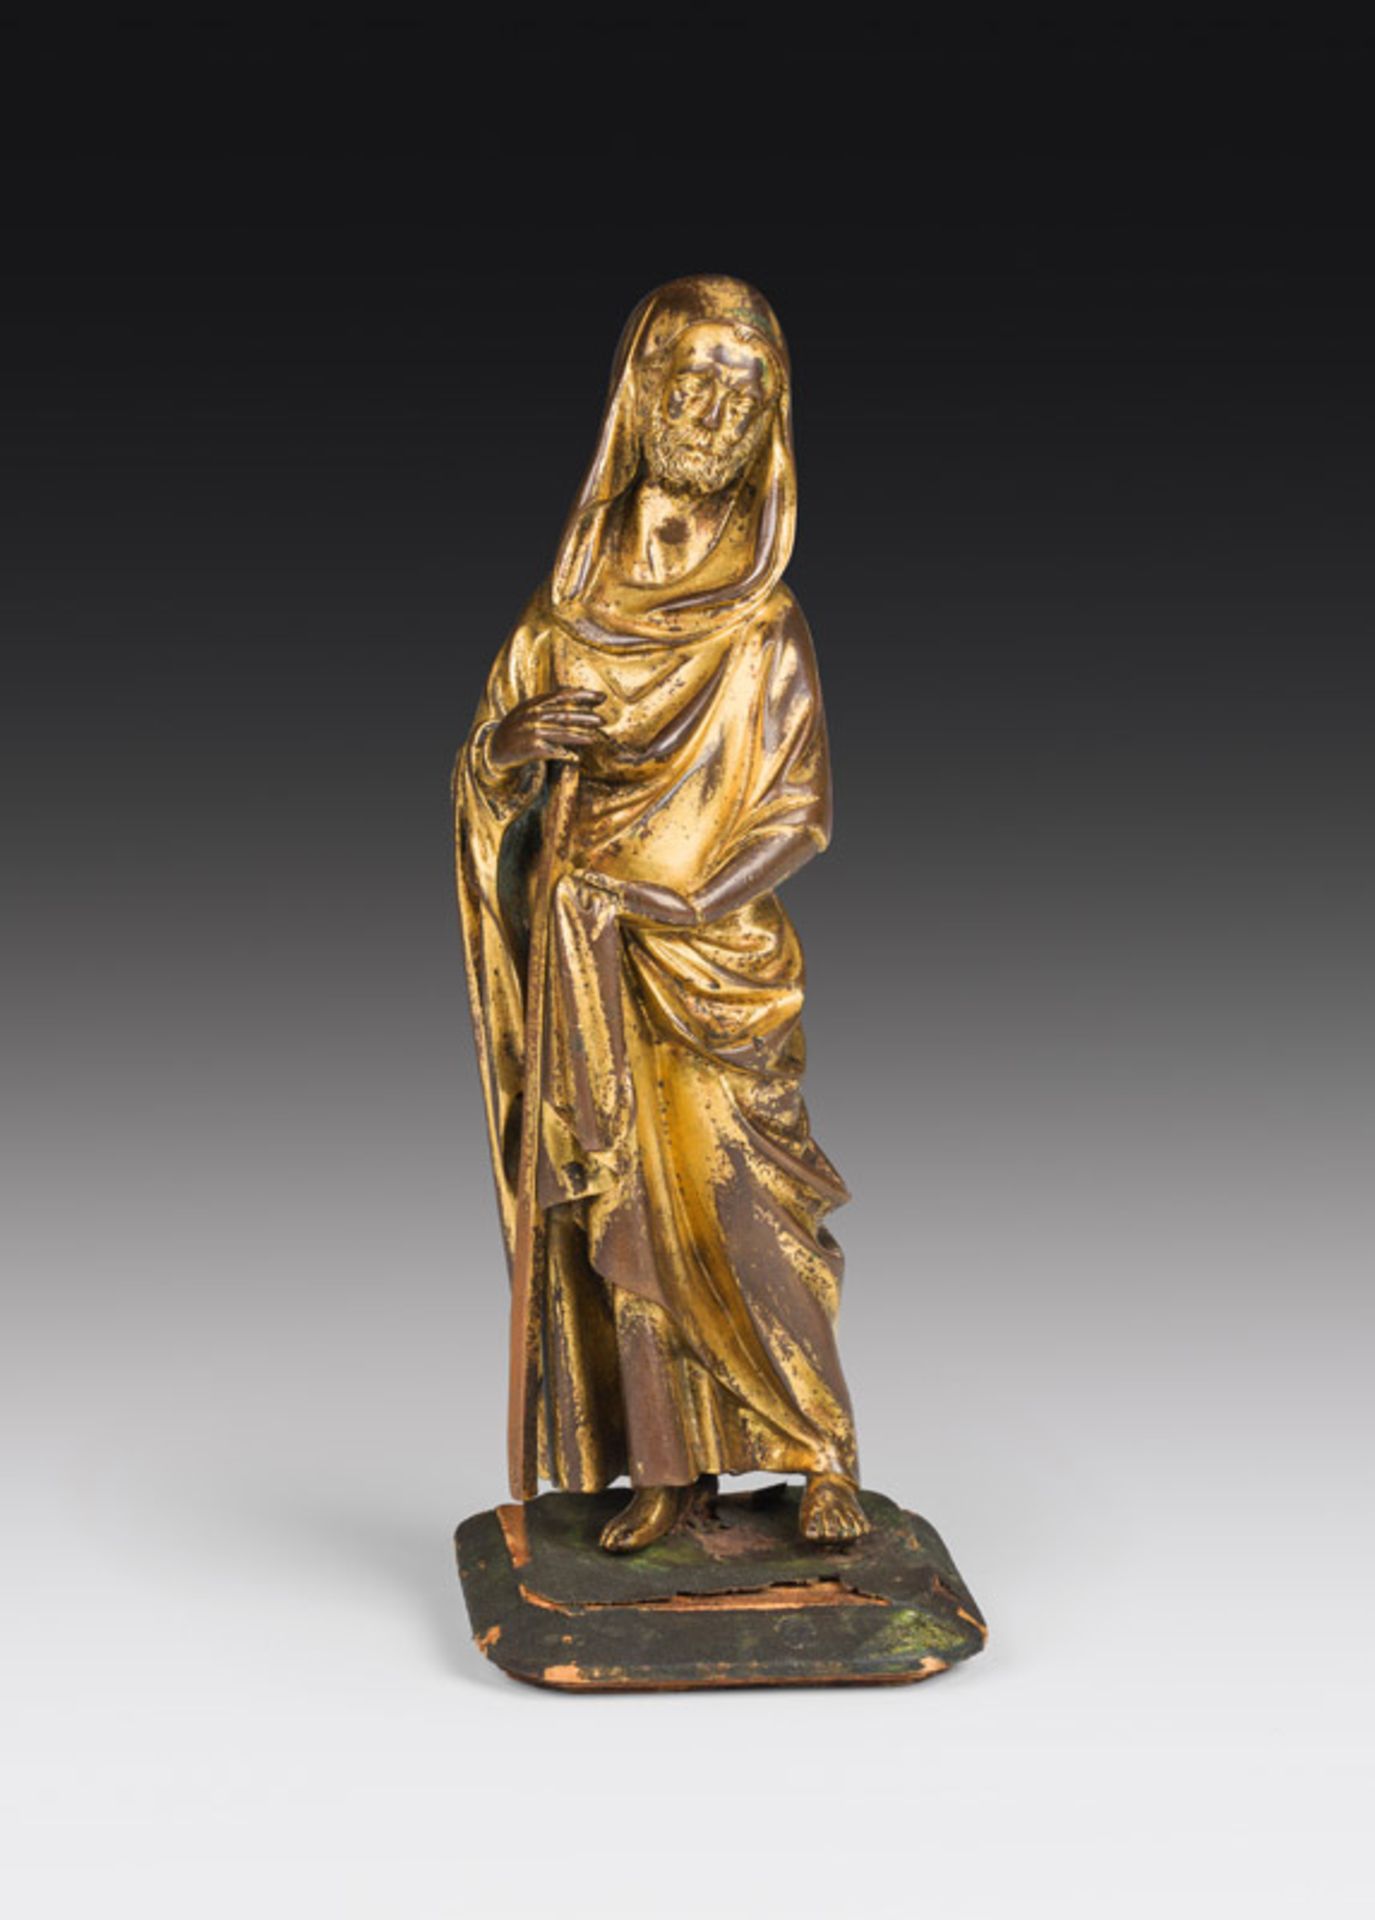 Apostle, France/Germany, 15th/16th century